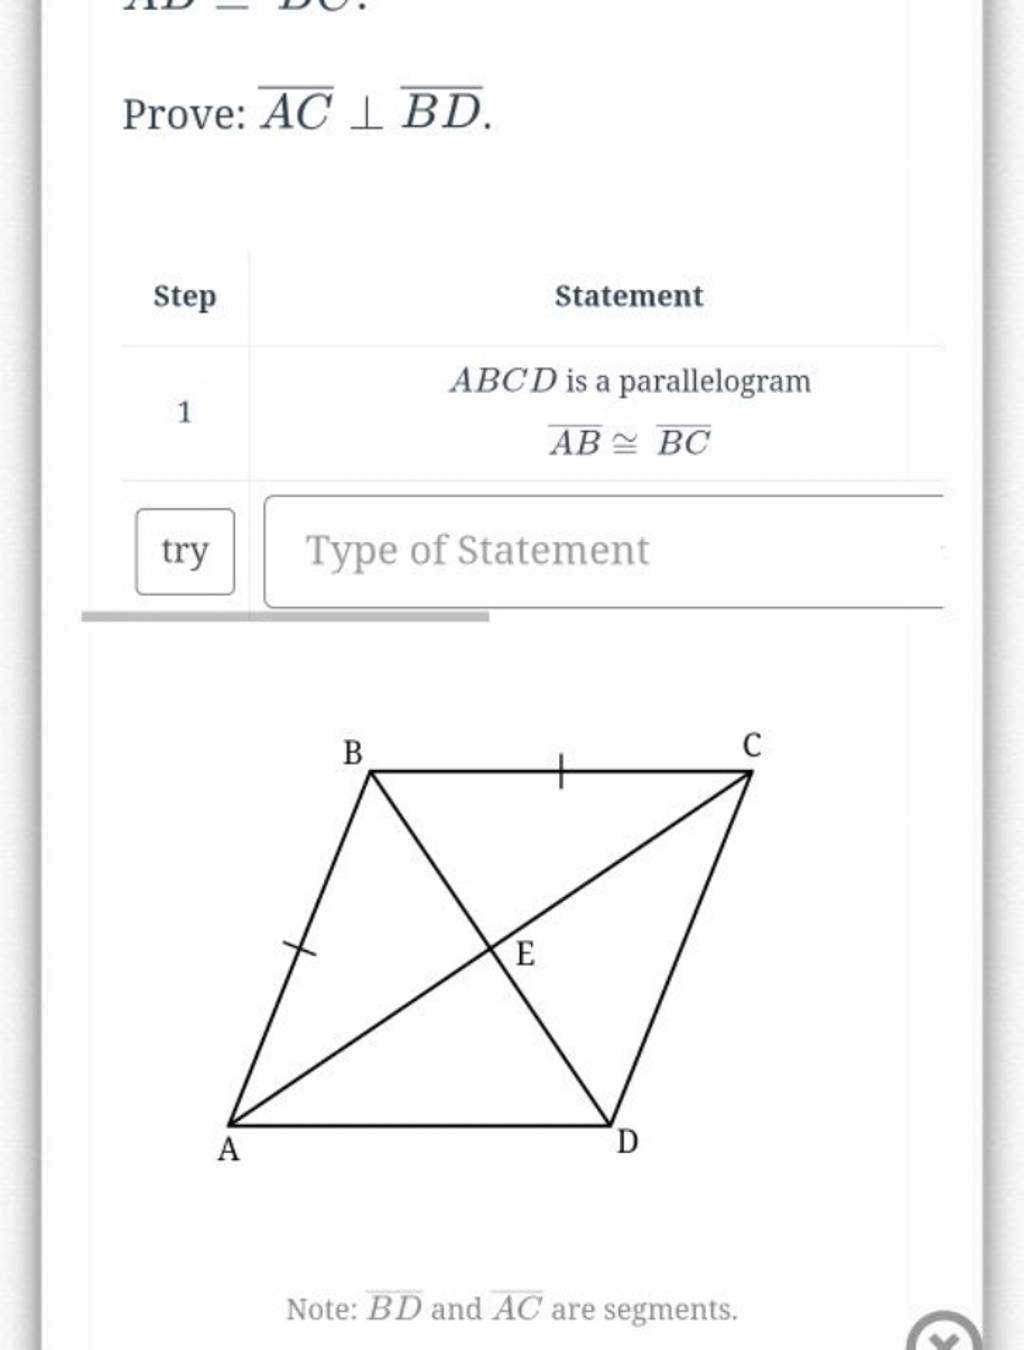 Prove: AC⊥BD.
StepStatement1ABCD is a parallelogramAB≅BC
Type of State